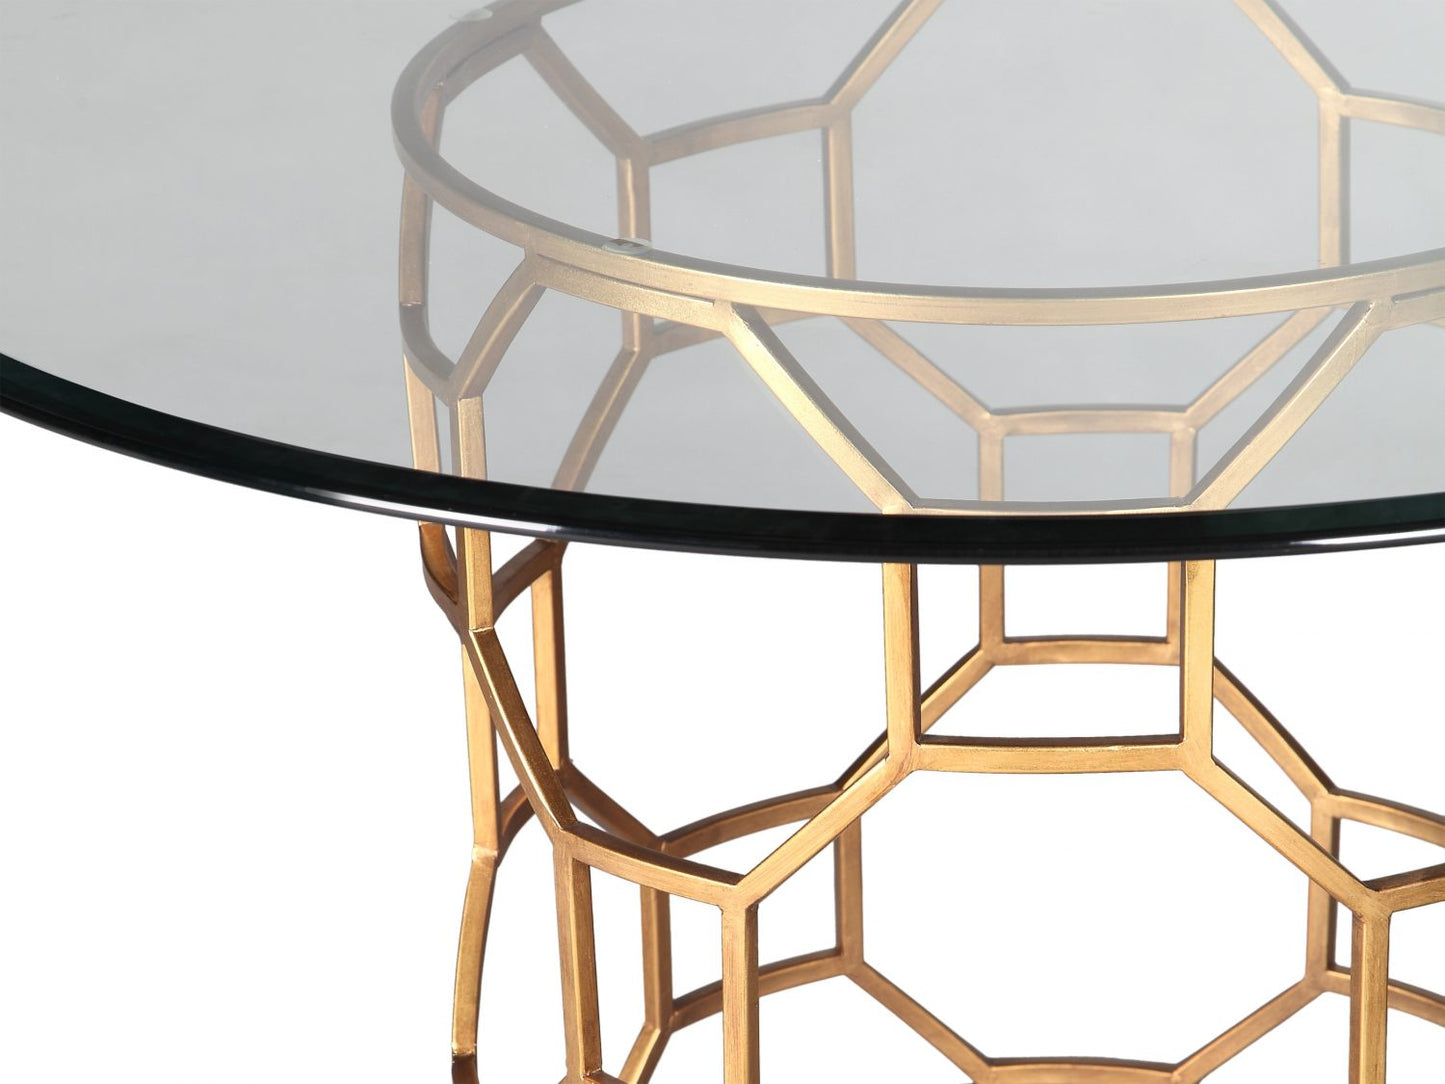 Liang & Eimil Central Dining Table Antique Gold | Outlet